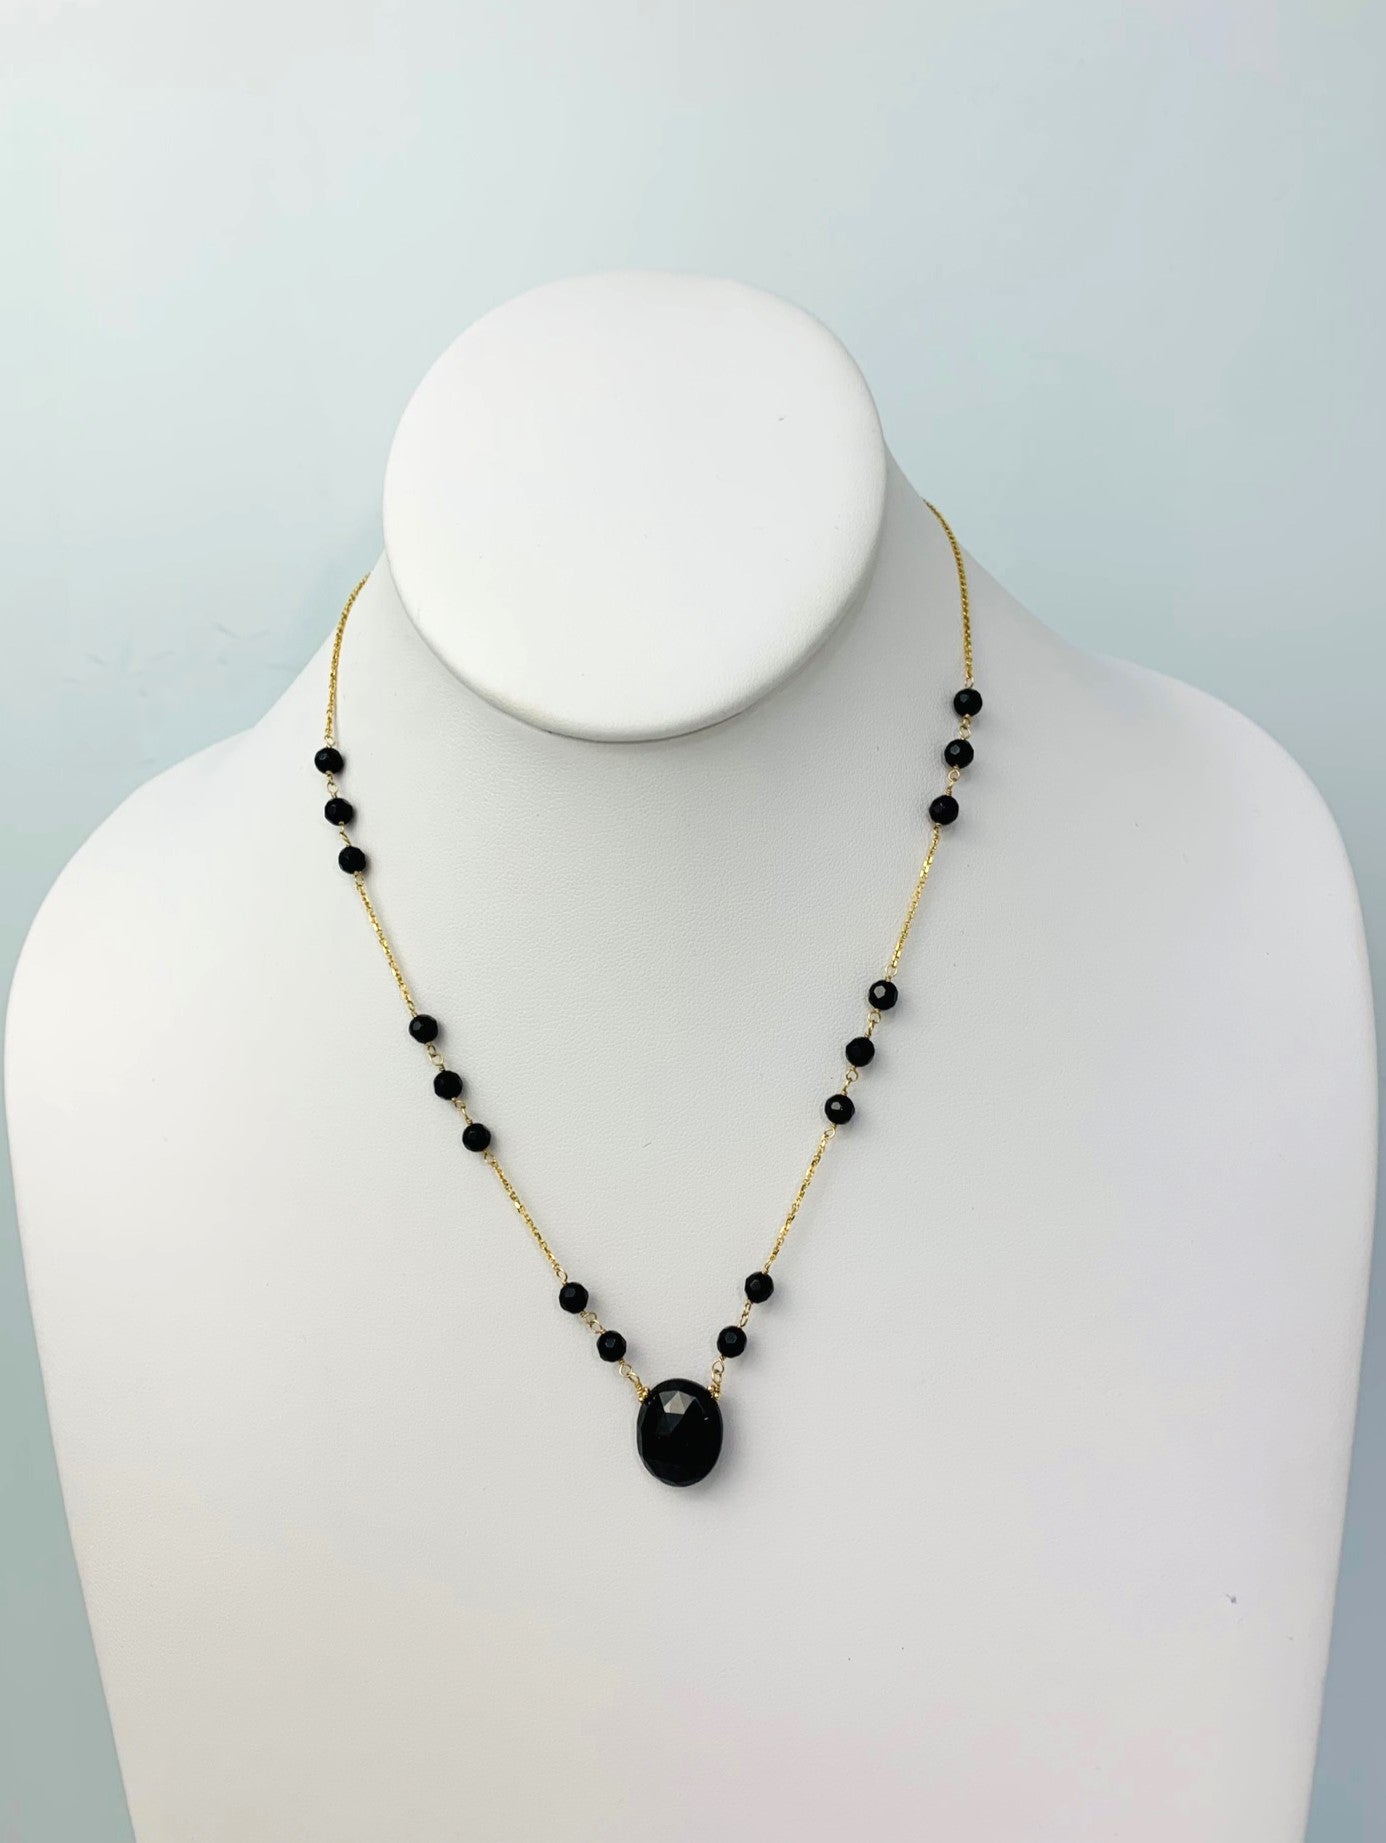 Clearance Sale! - 17-18" Onyx Station Necklace With Oval Center in 14KY - NCK-379-TNCGM14Y-OX-18